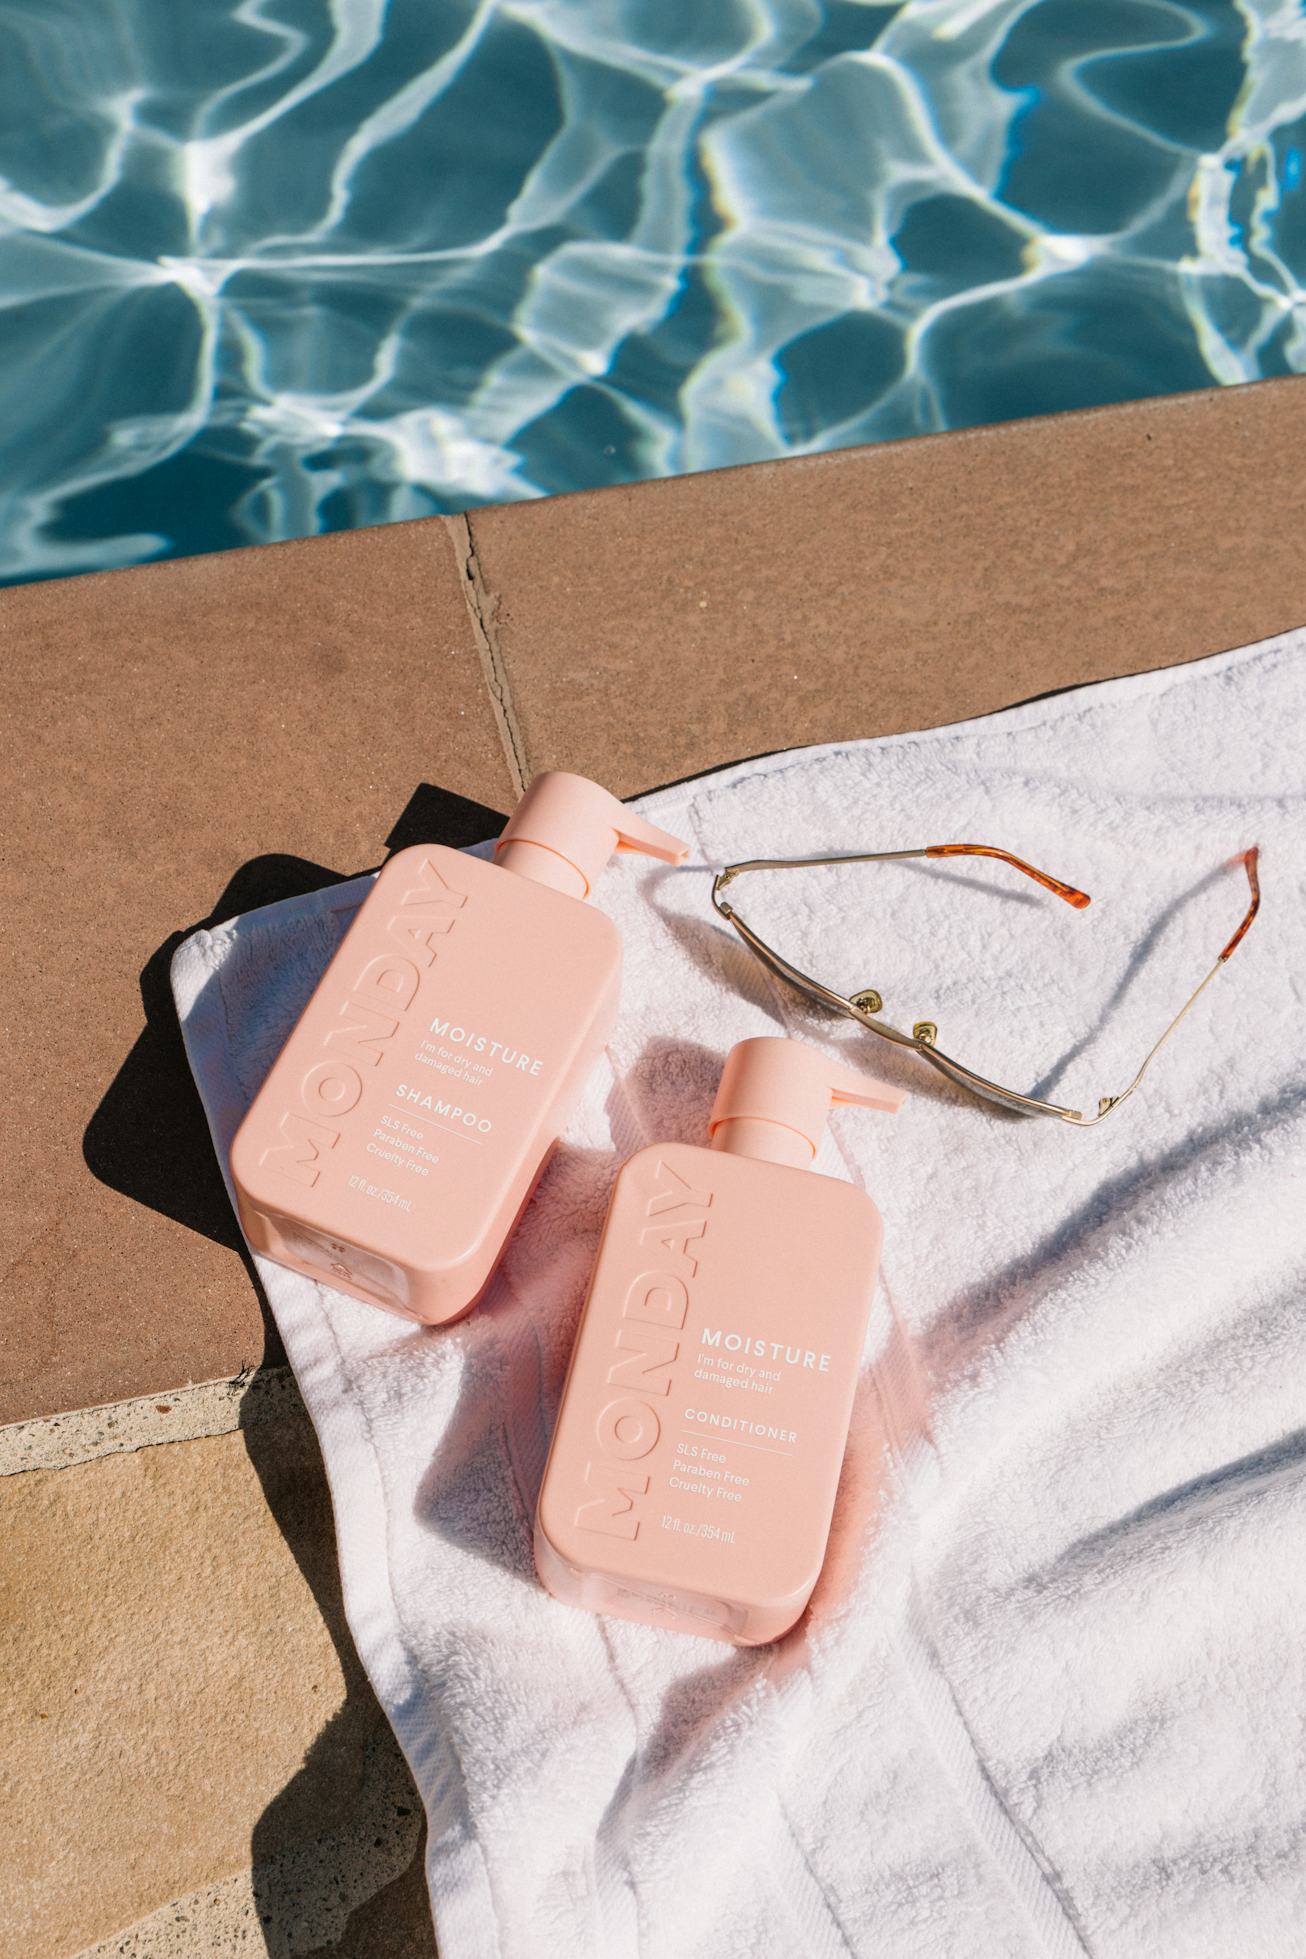 Two pink bottles of MONDAY hair care products on a towel by the pool.